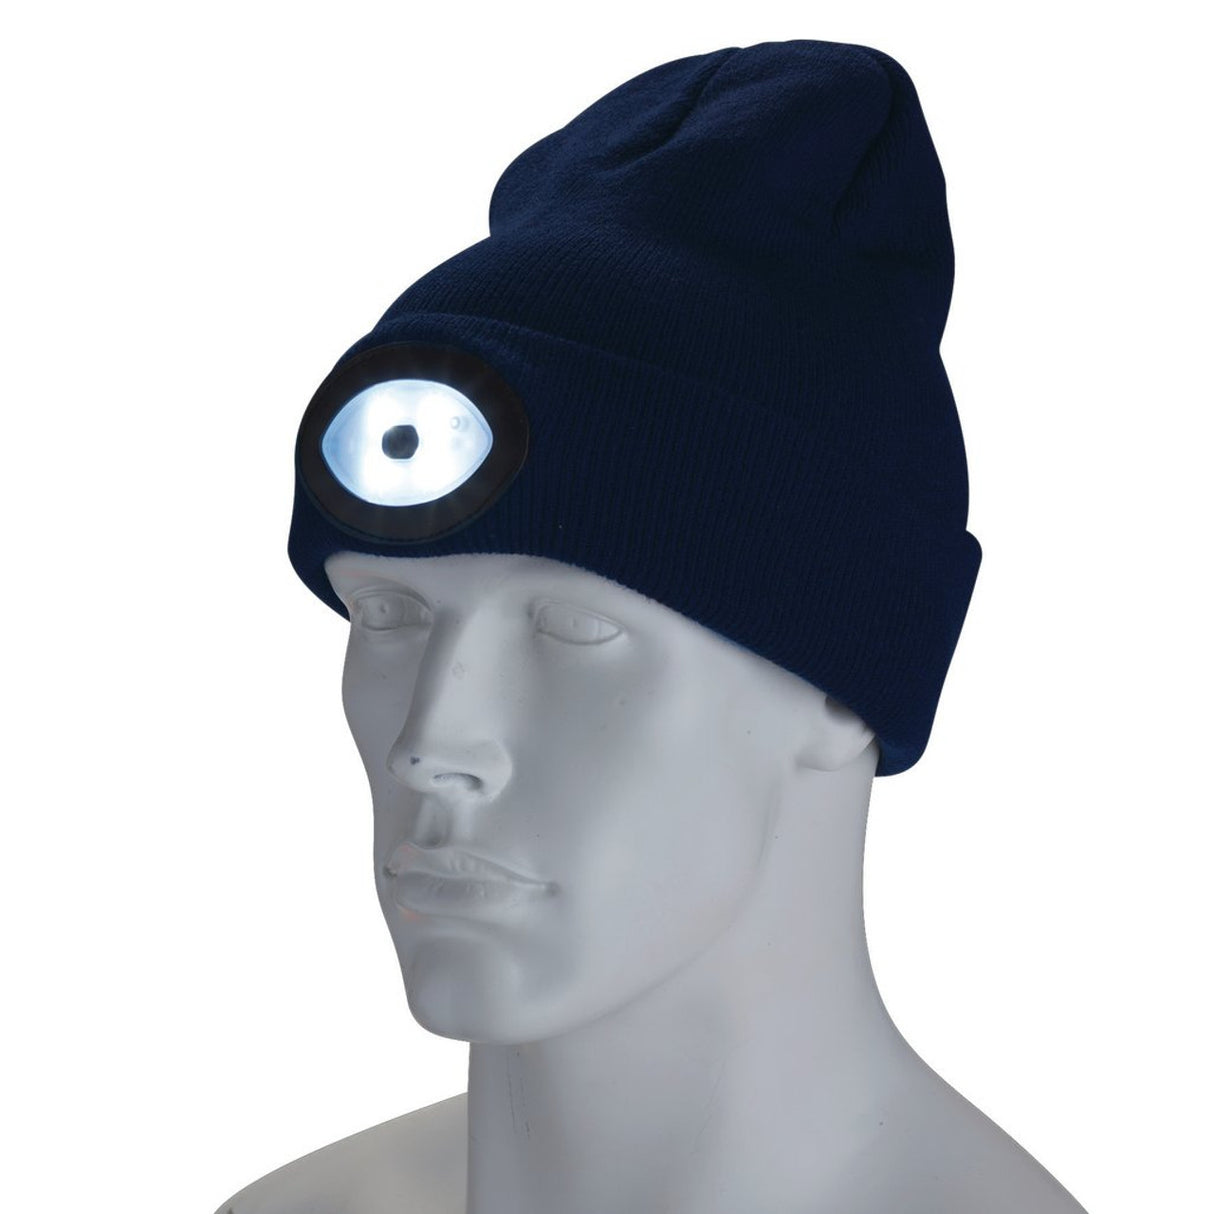 Draper Tools Beanie Hat With Rechargeable Torch, One Size, 1W, 100 Lumens, Navy Blue